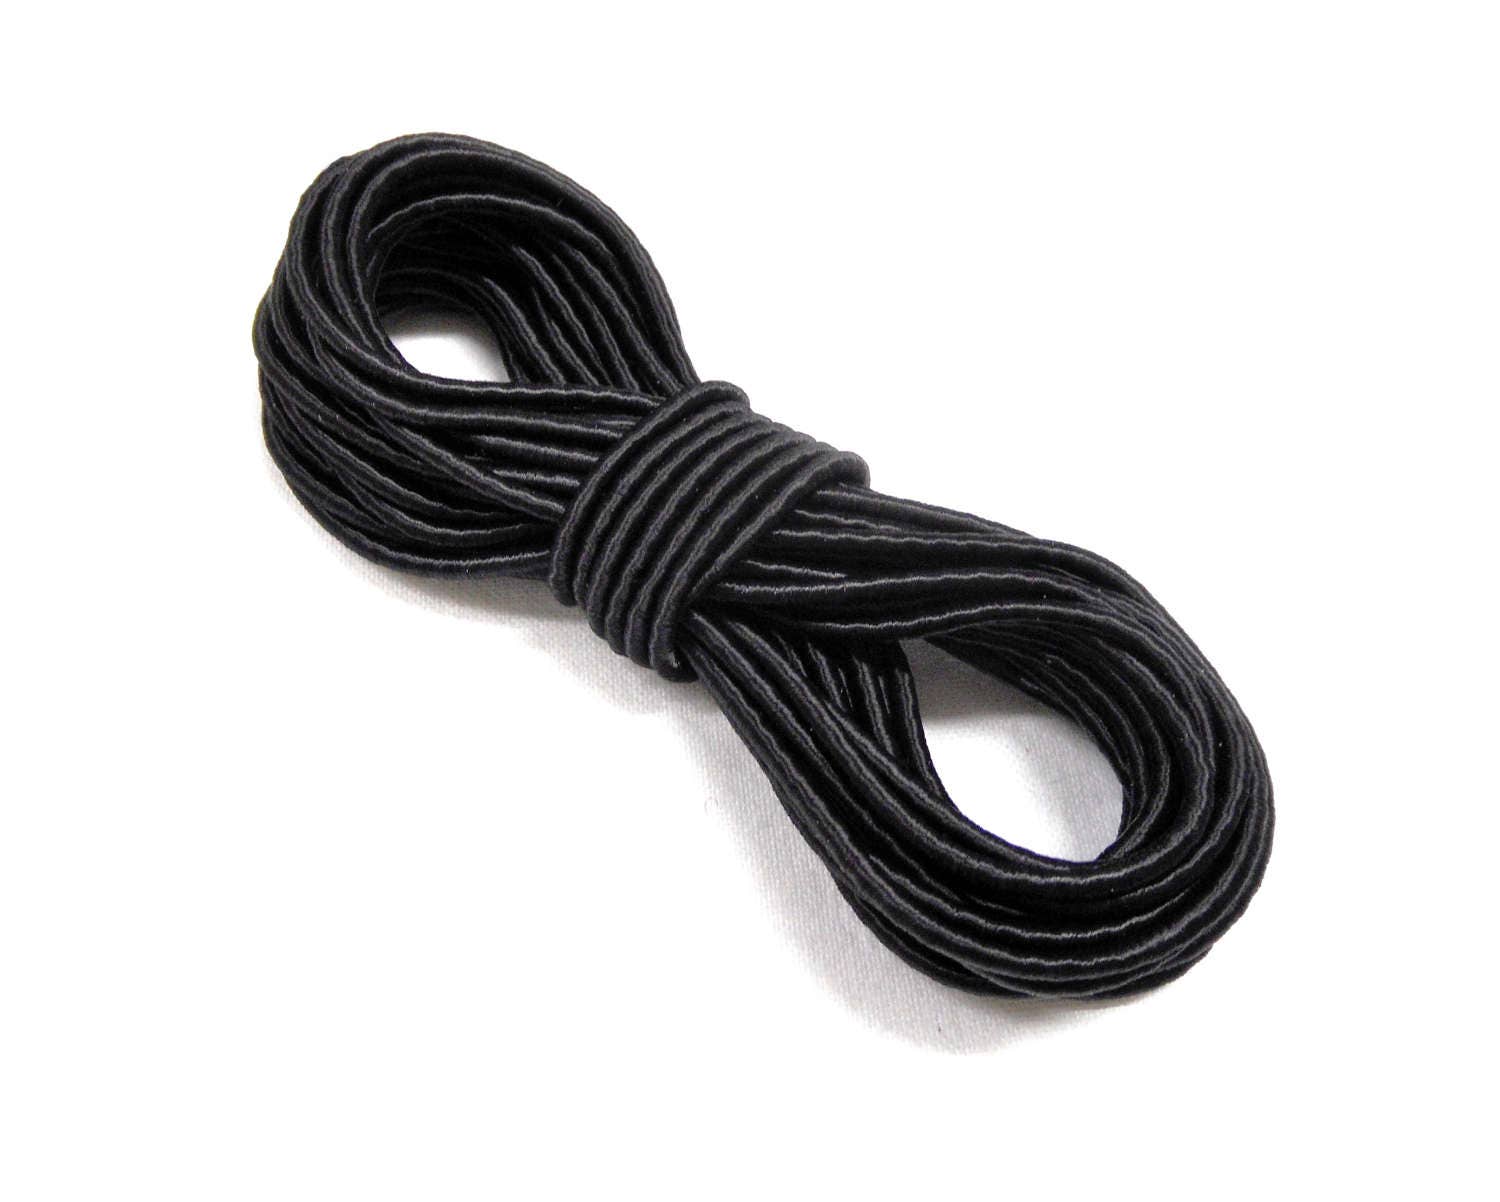 2mm Black Wrapped Silk Satin Cord, Soutache Wrapped Thread Cord, Artificial Silk  Cord, Rope Cord 2 Yards/1,84m Approx.1 Piece 